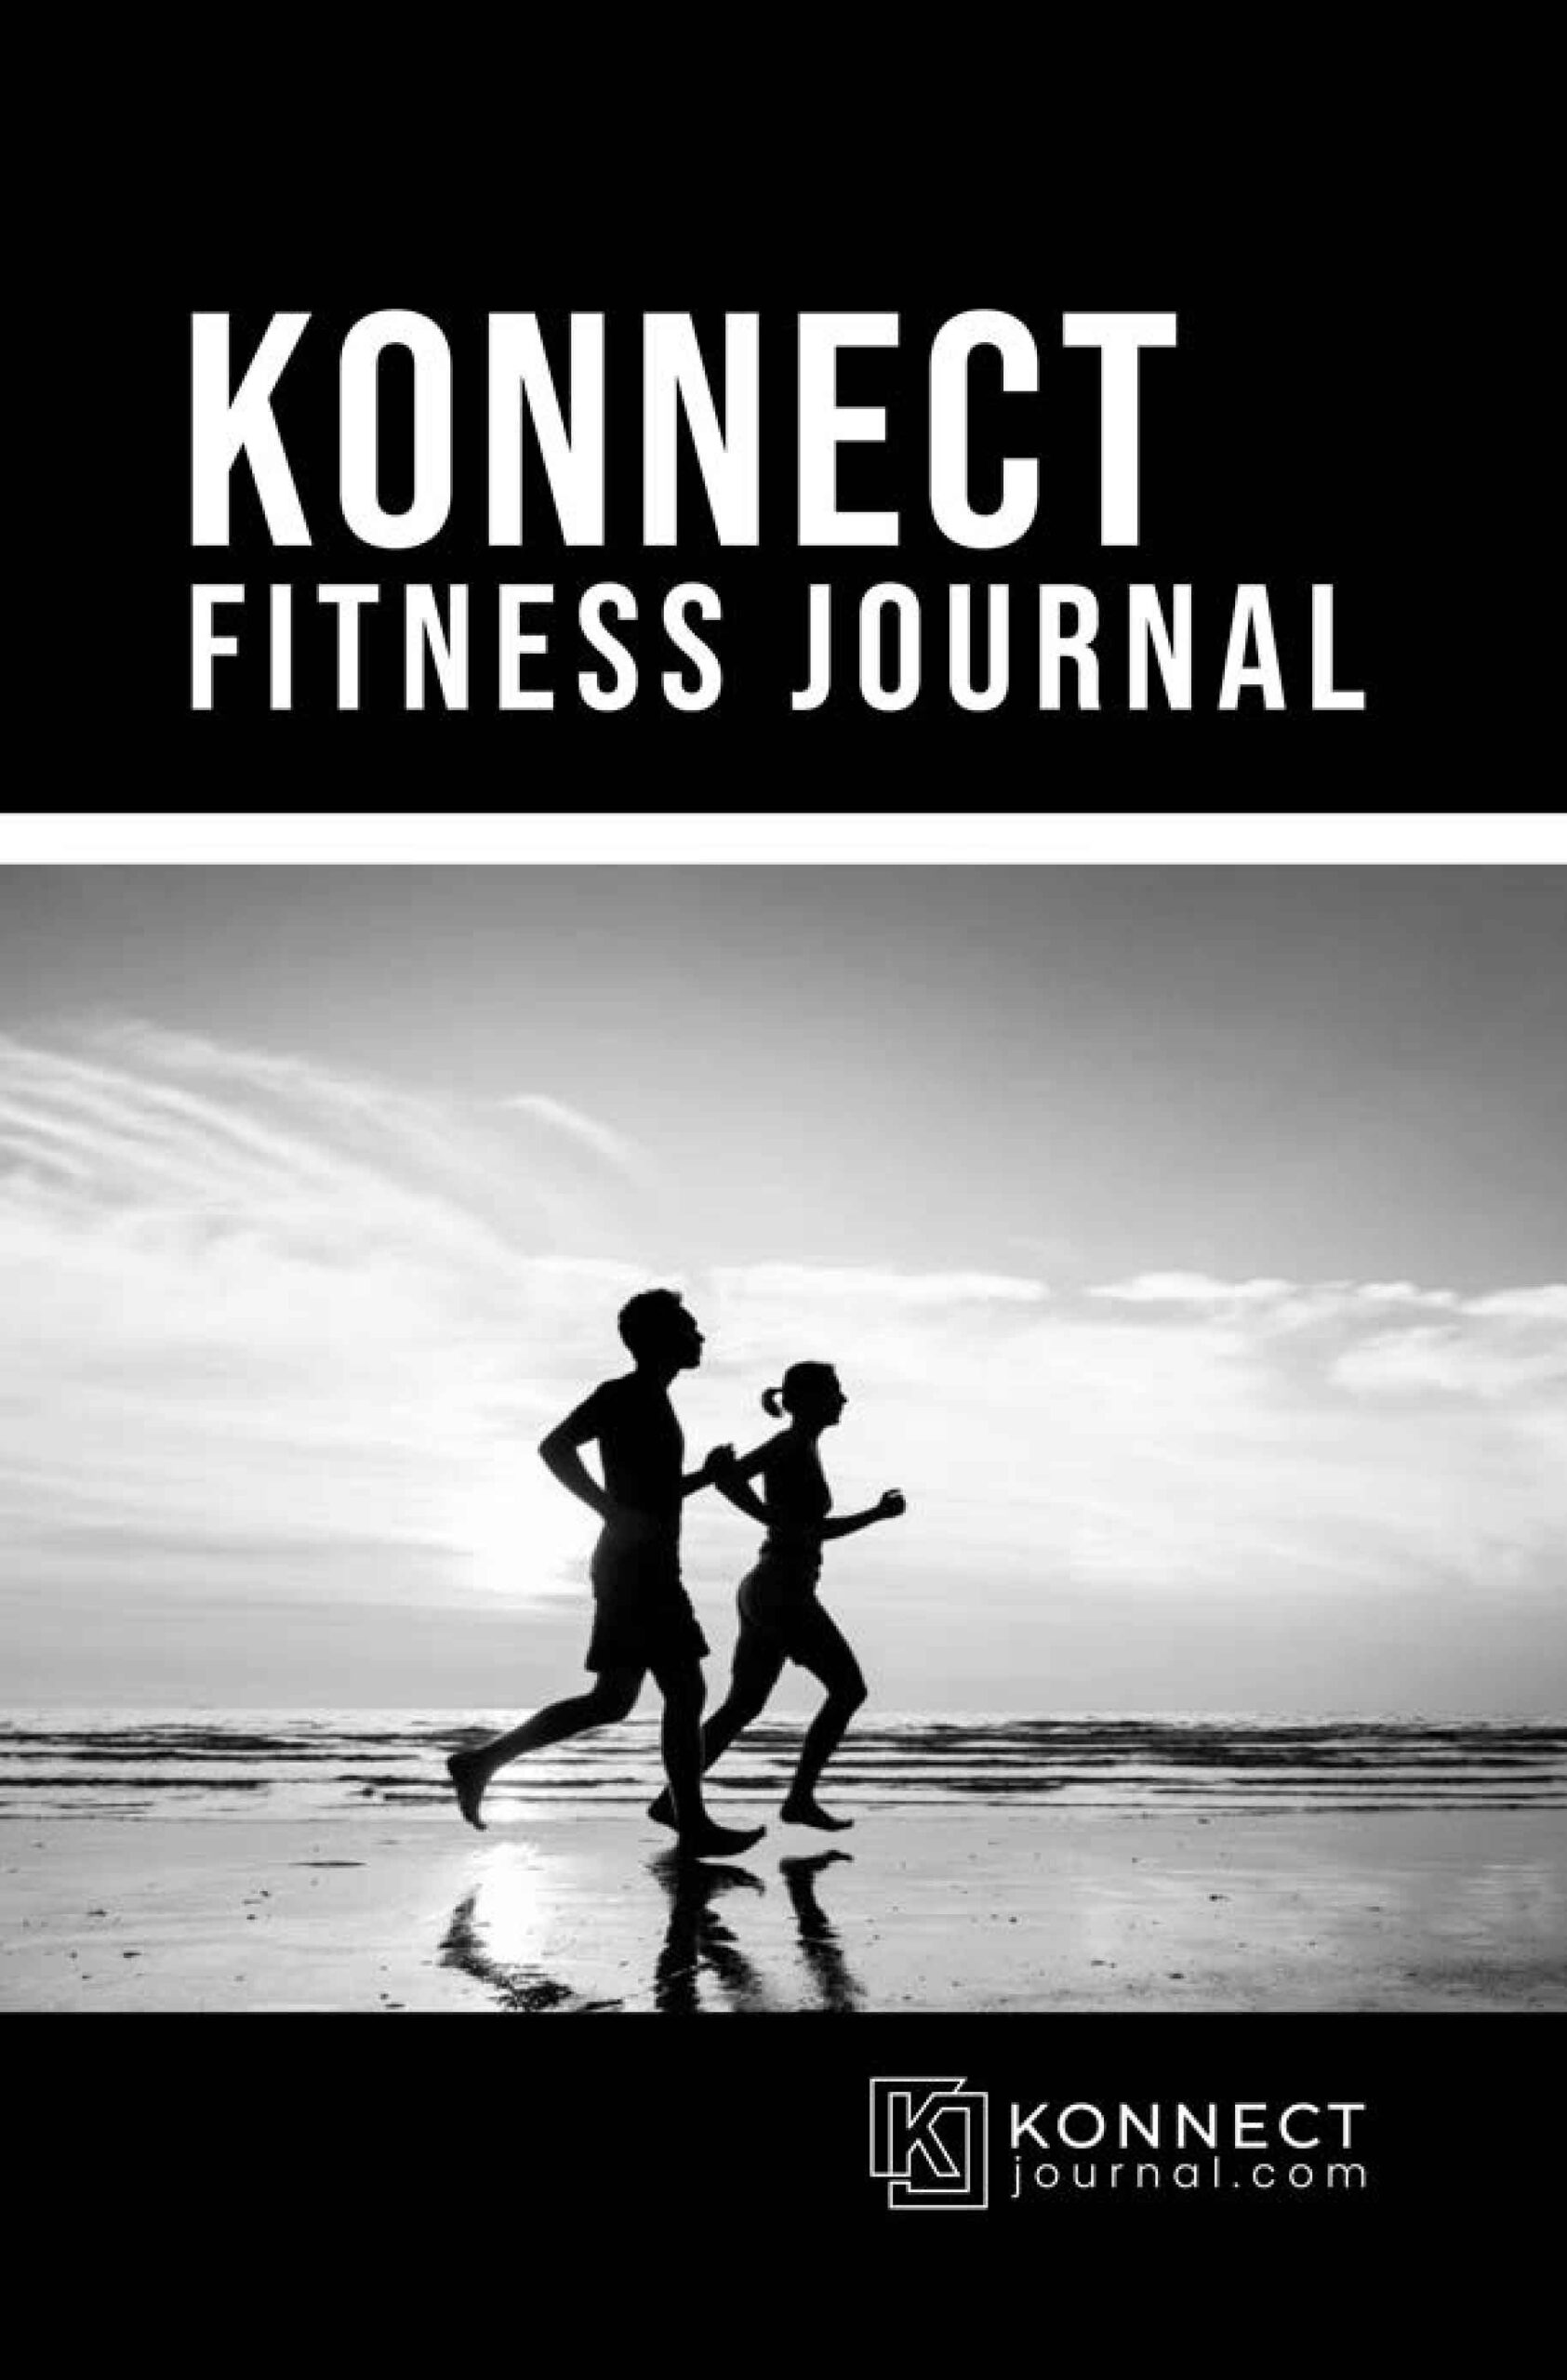 The Konnect Fitness Journal cover page